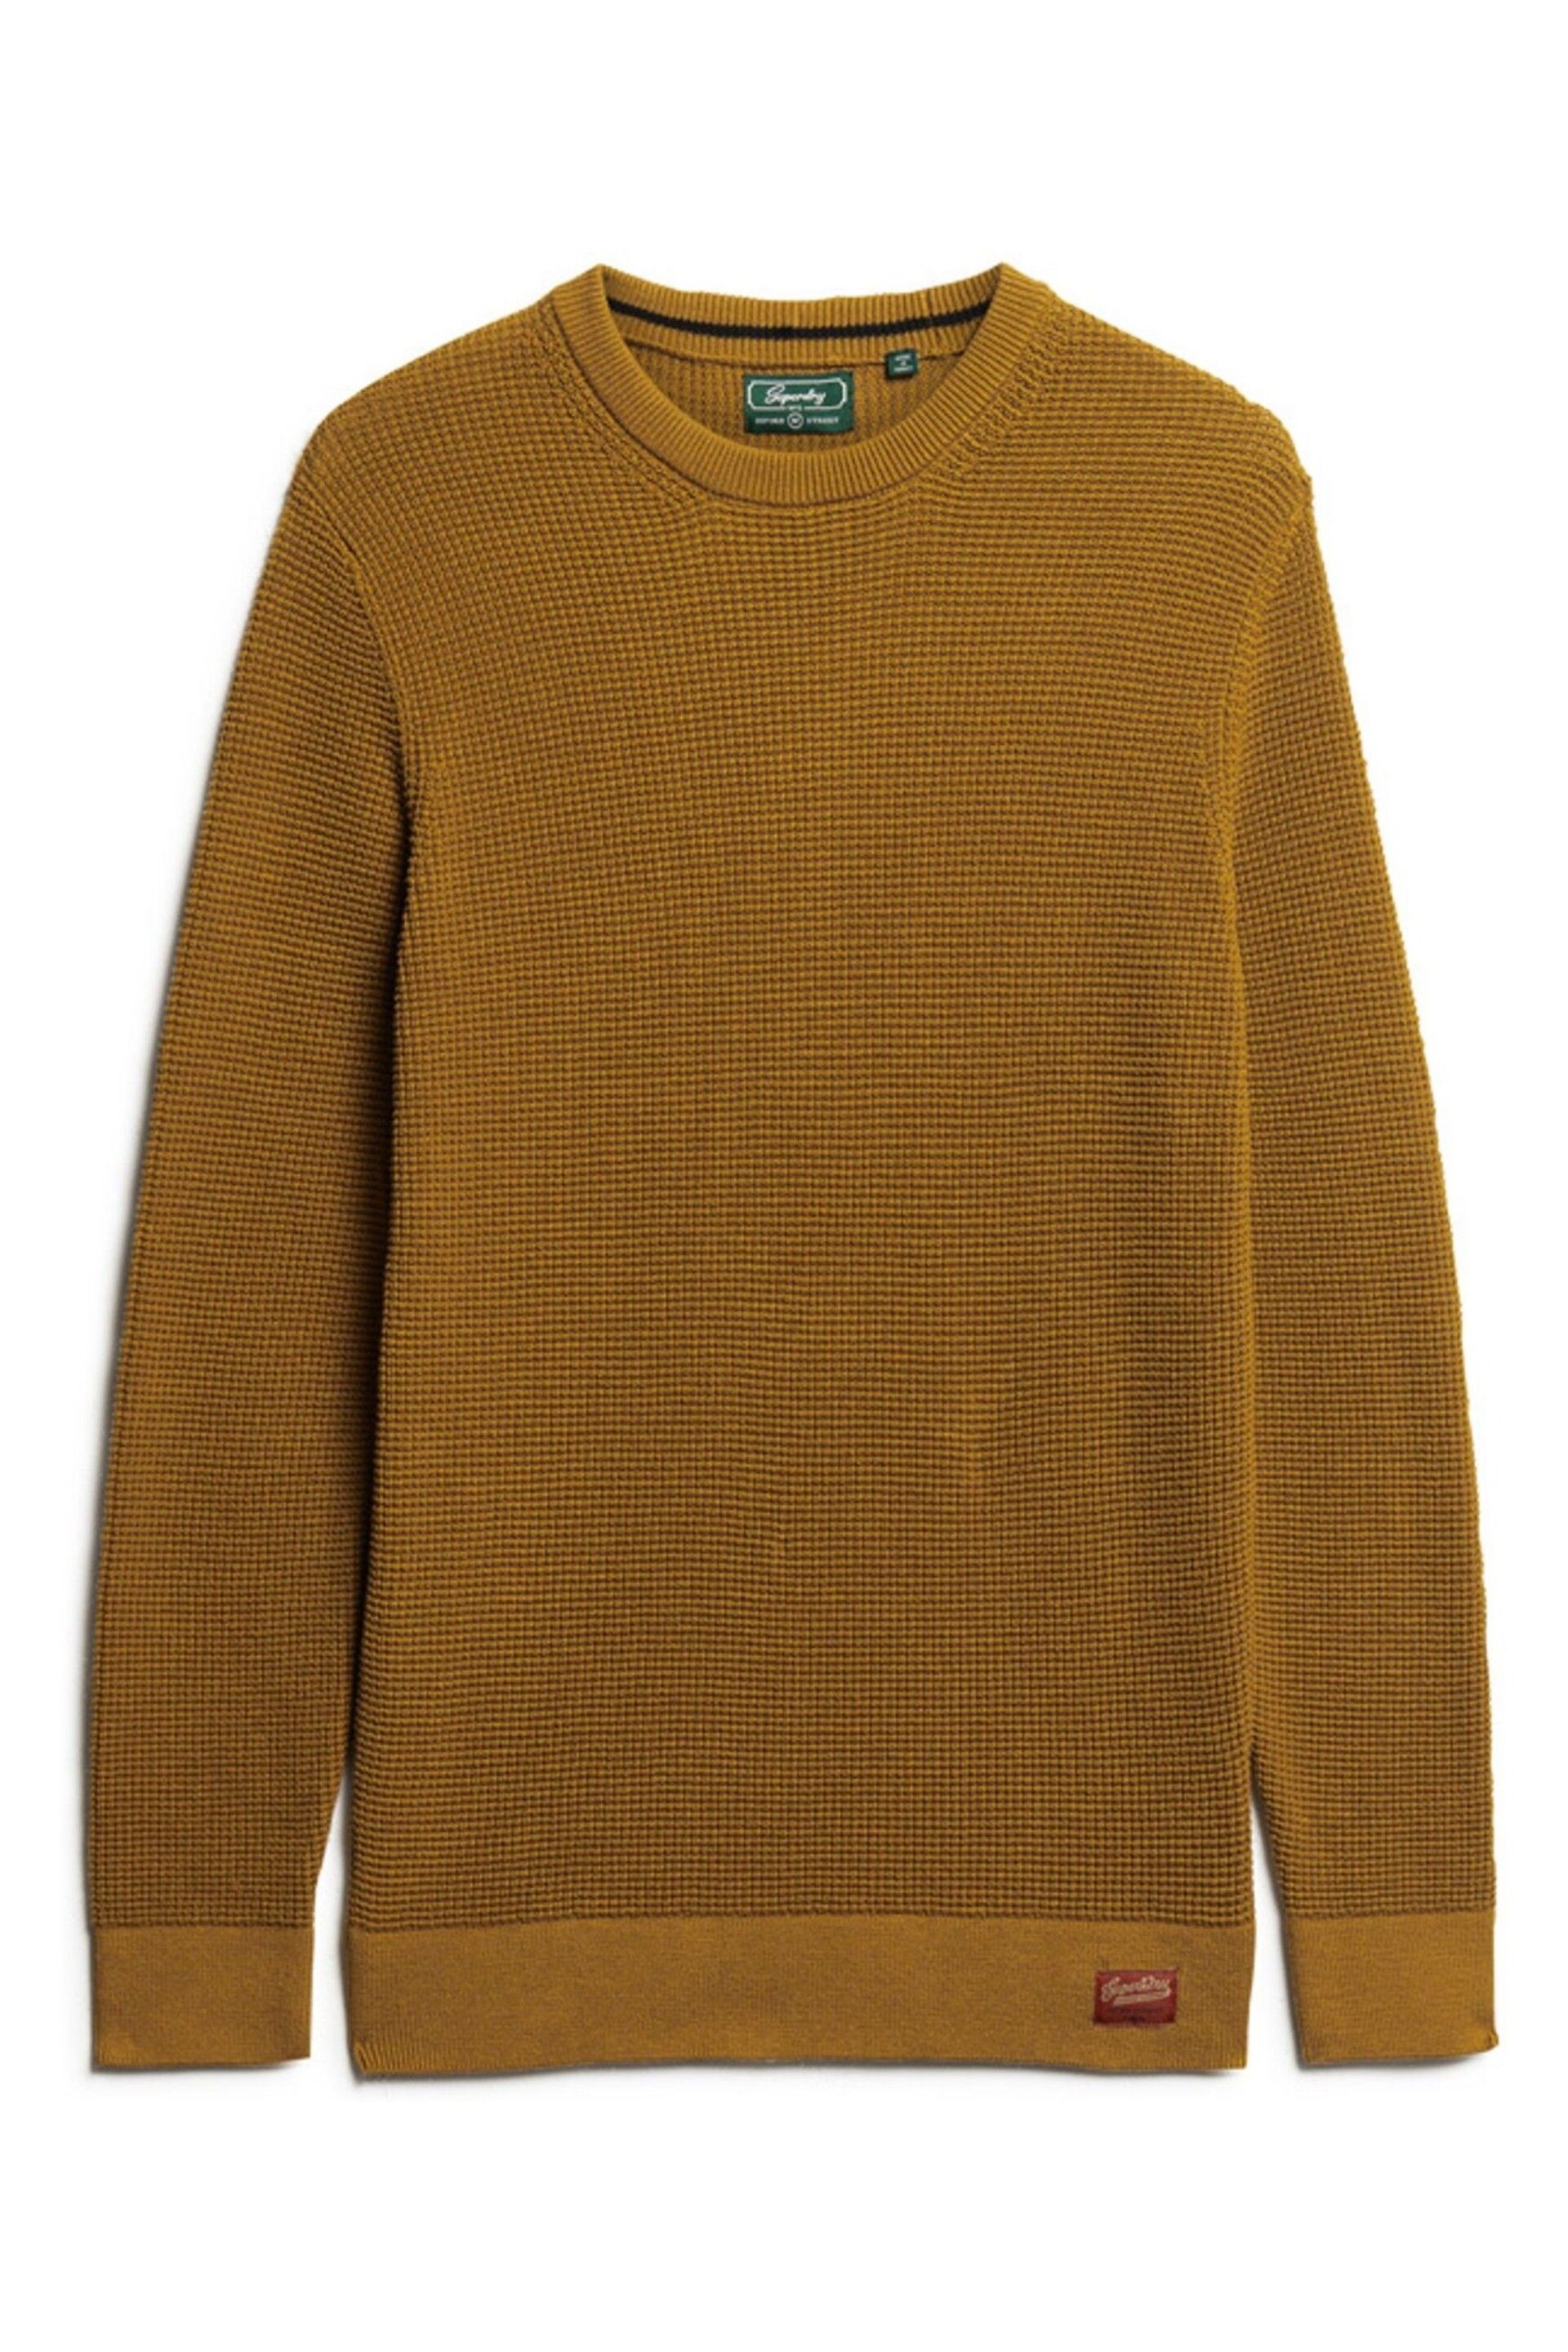 Superdry Musturd Yellow Textured Crew Knit Jumper - Image 4 of 6